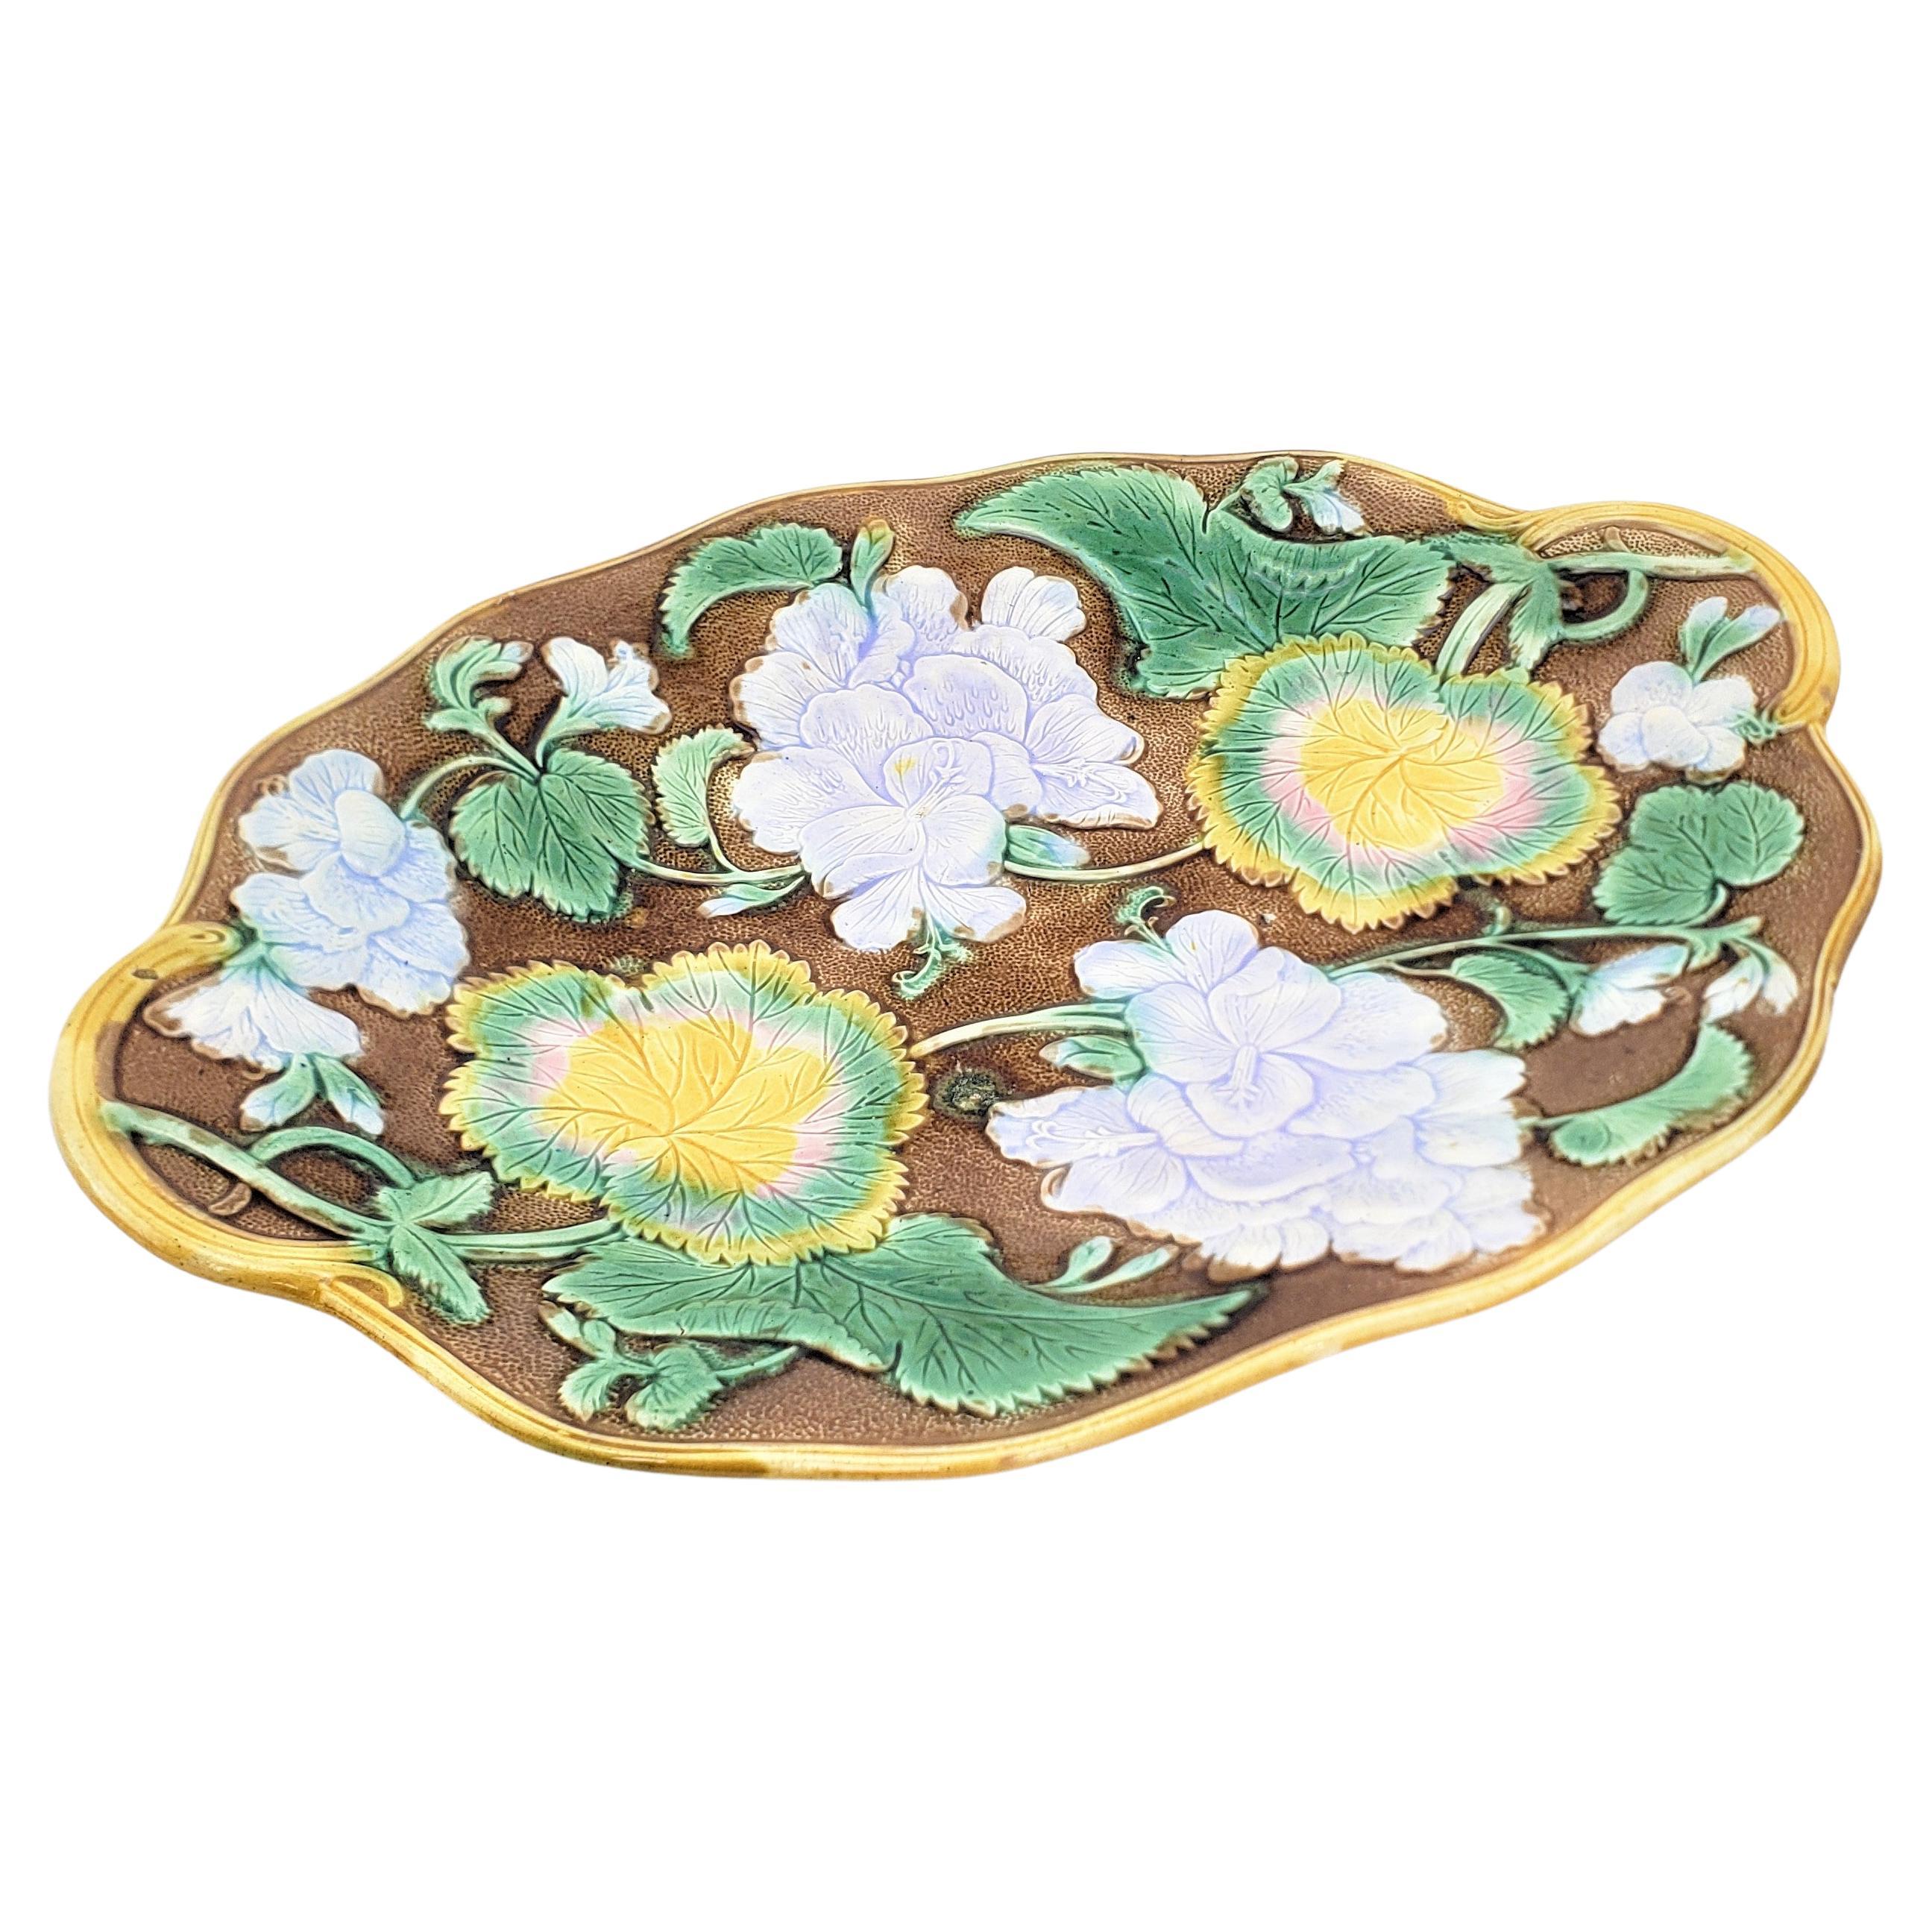 Small Antique Majolica Serving Dish or Platter with Leaf & Flower Decoration